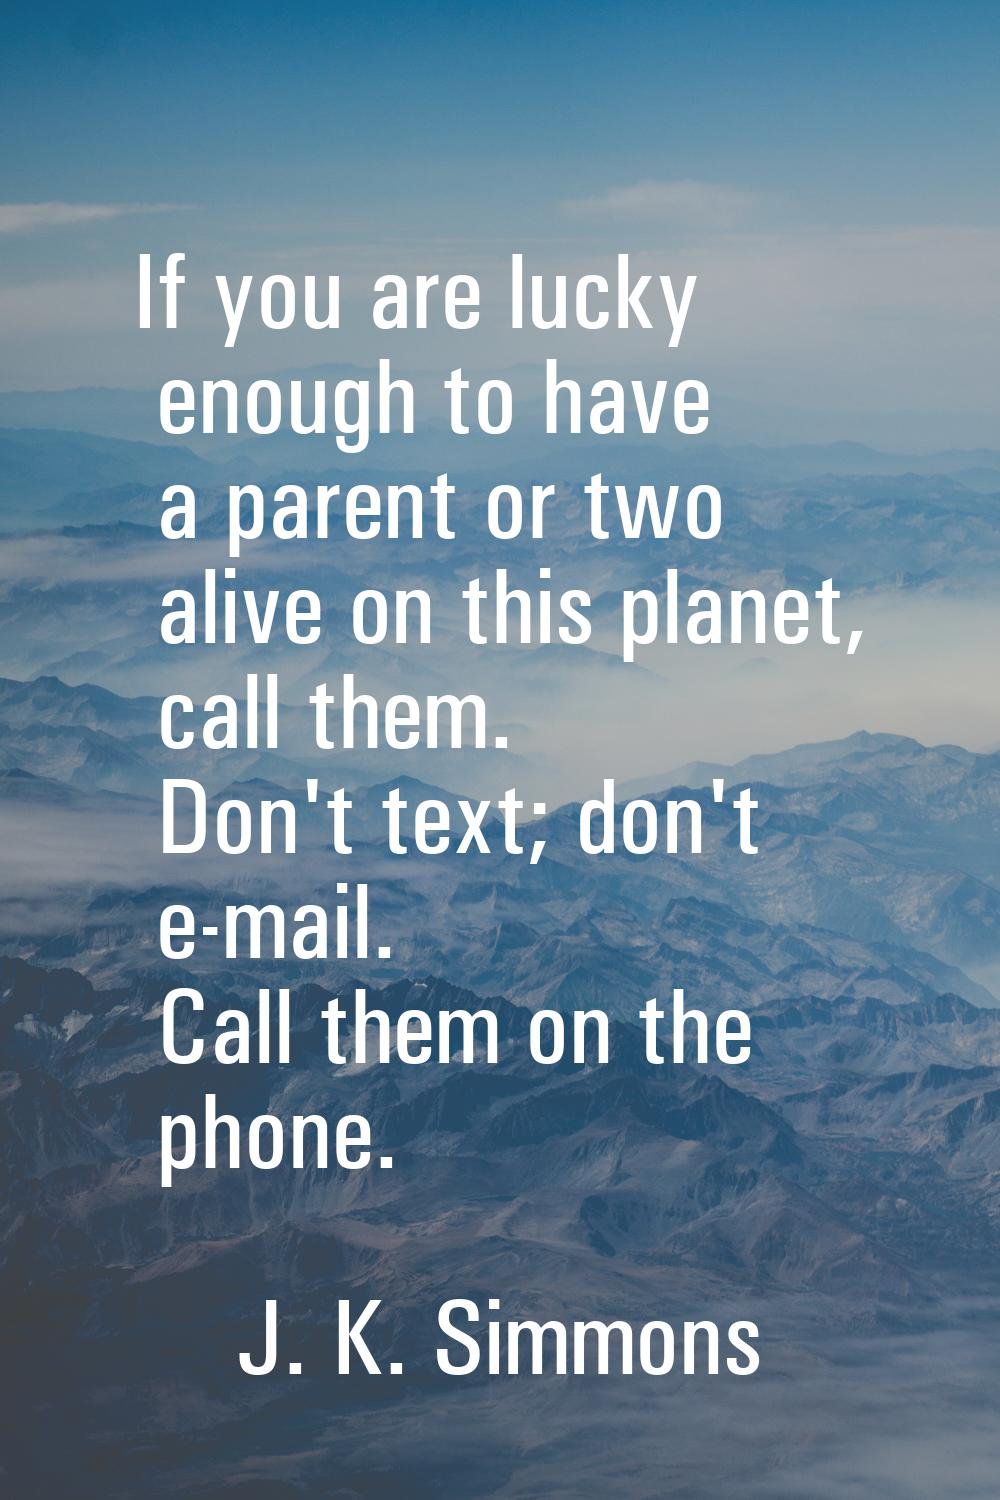 If you are lucky enough to have a parent or two alive on this planet, call them. Don't text; don't 